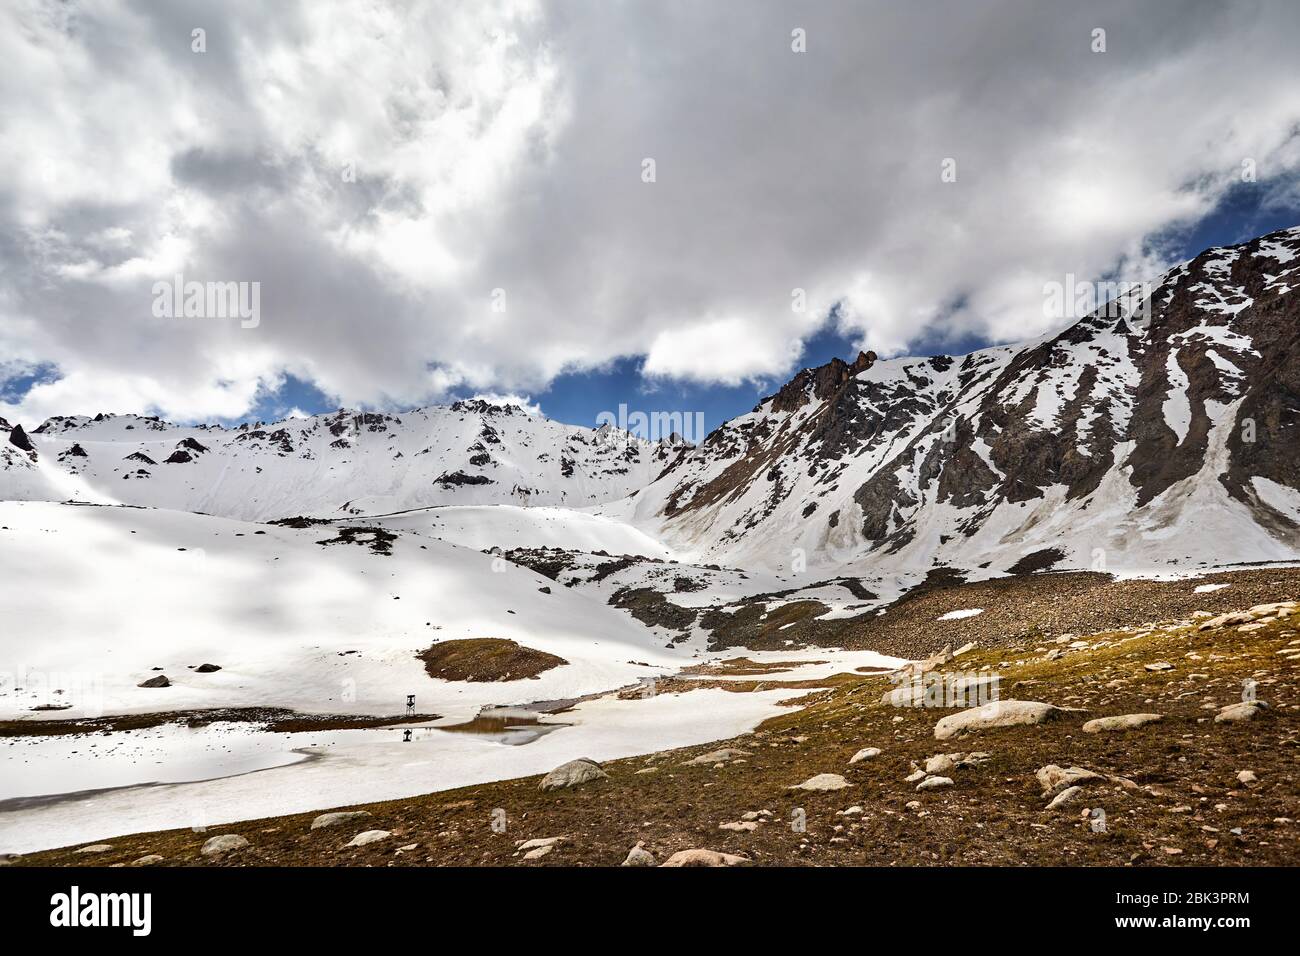 Landscape of snow mountain valley and lake against cloudy sky in Kazakhstan Stock Photo